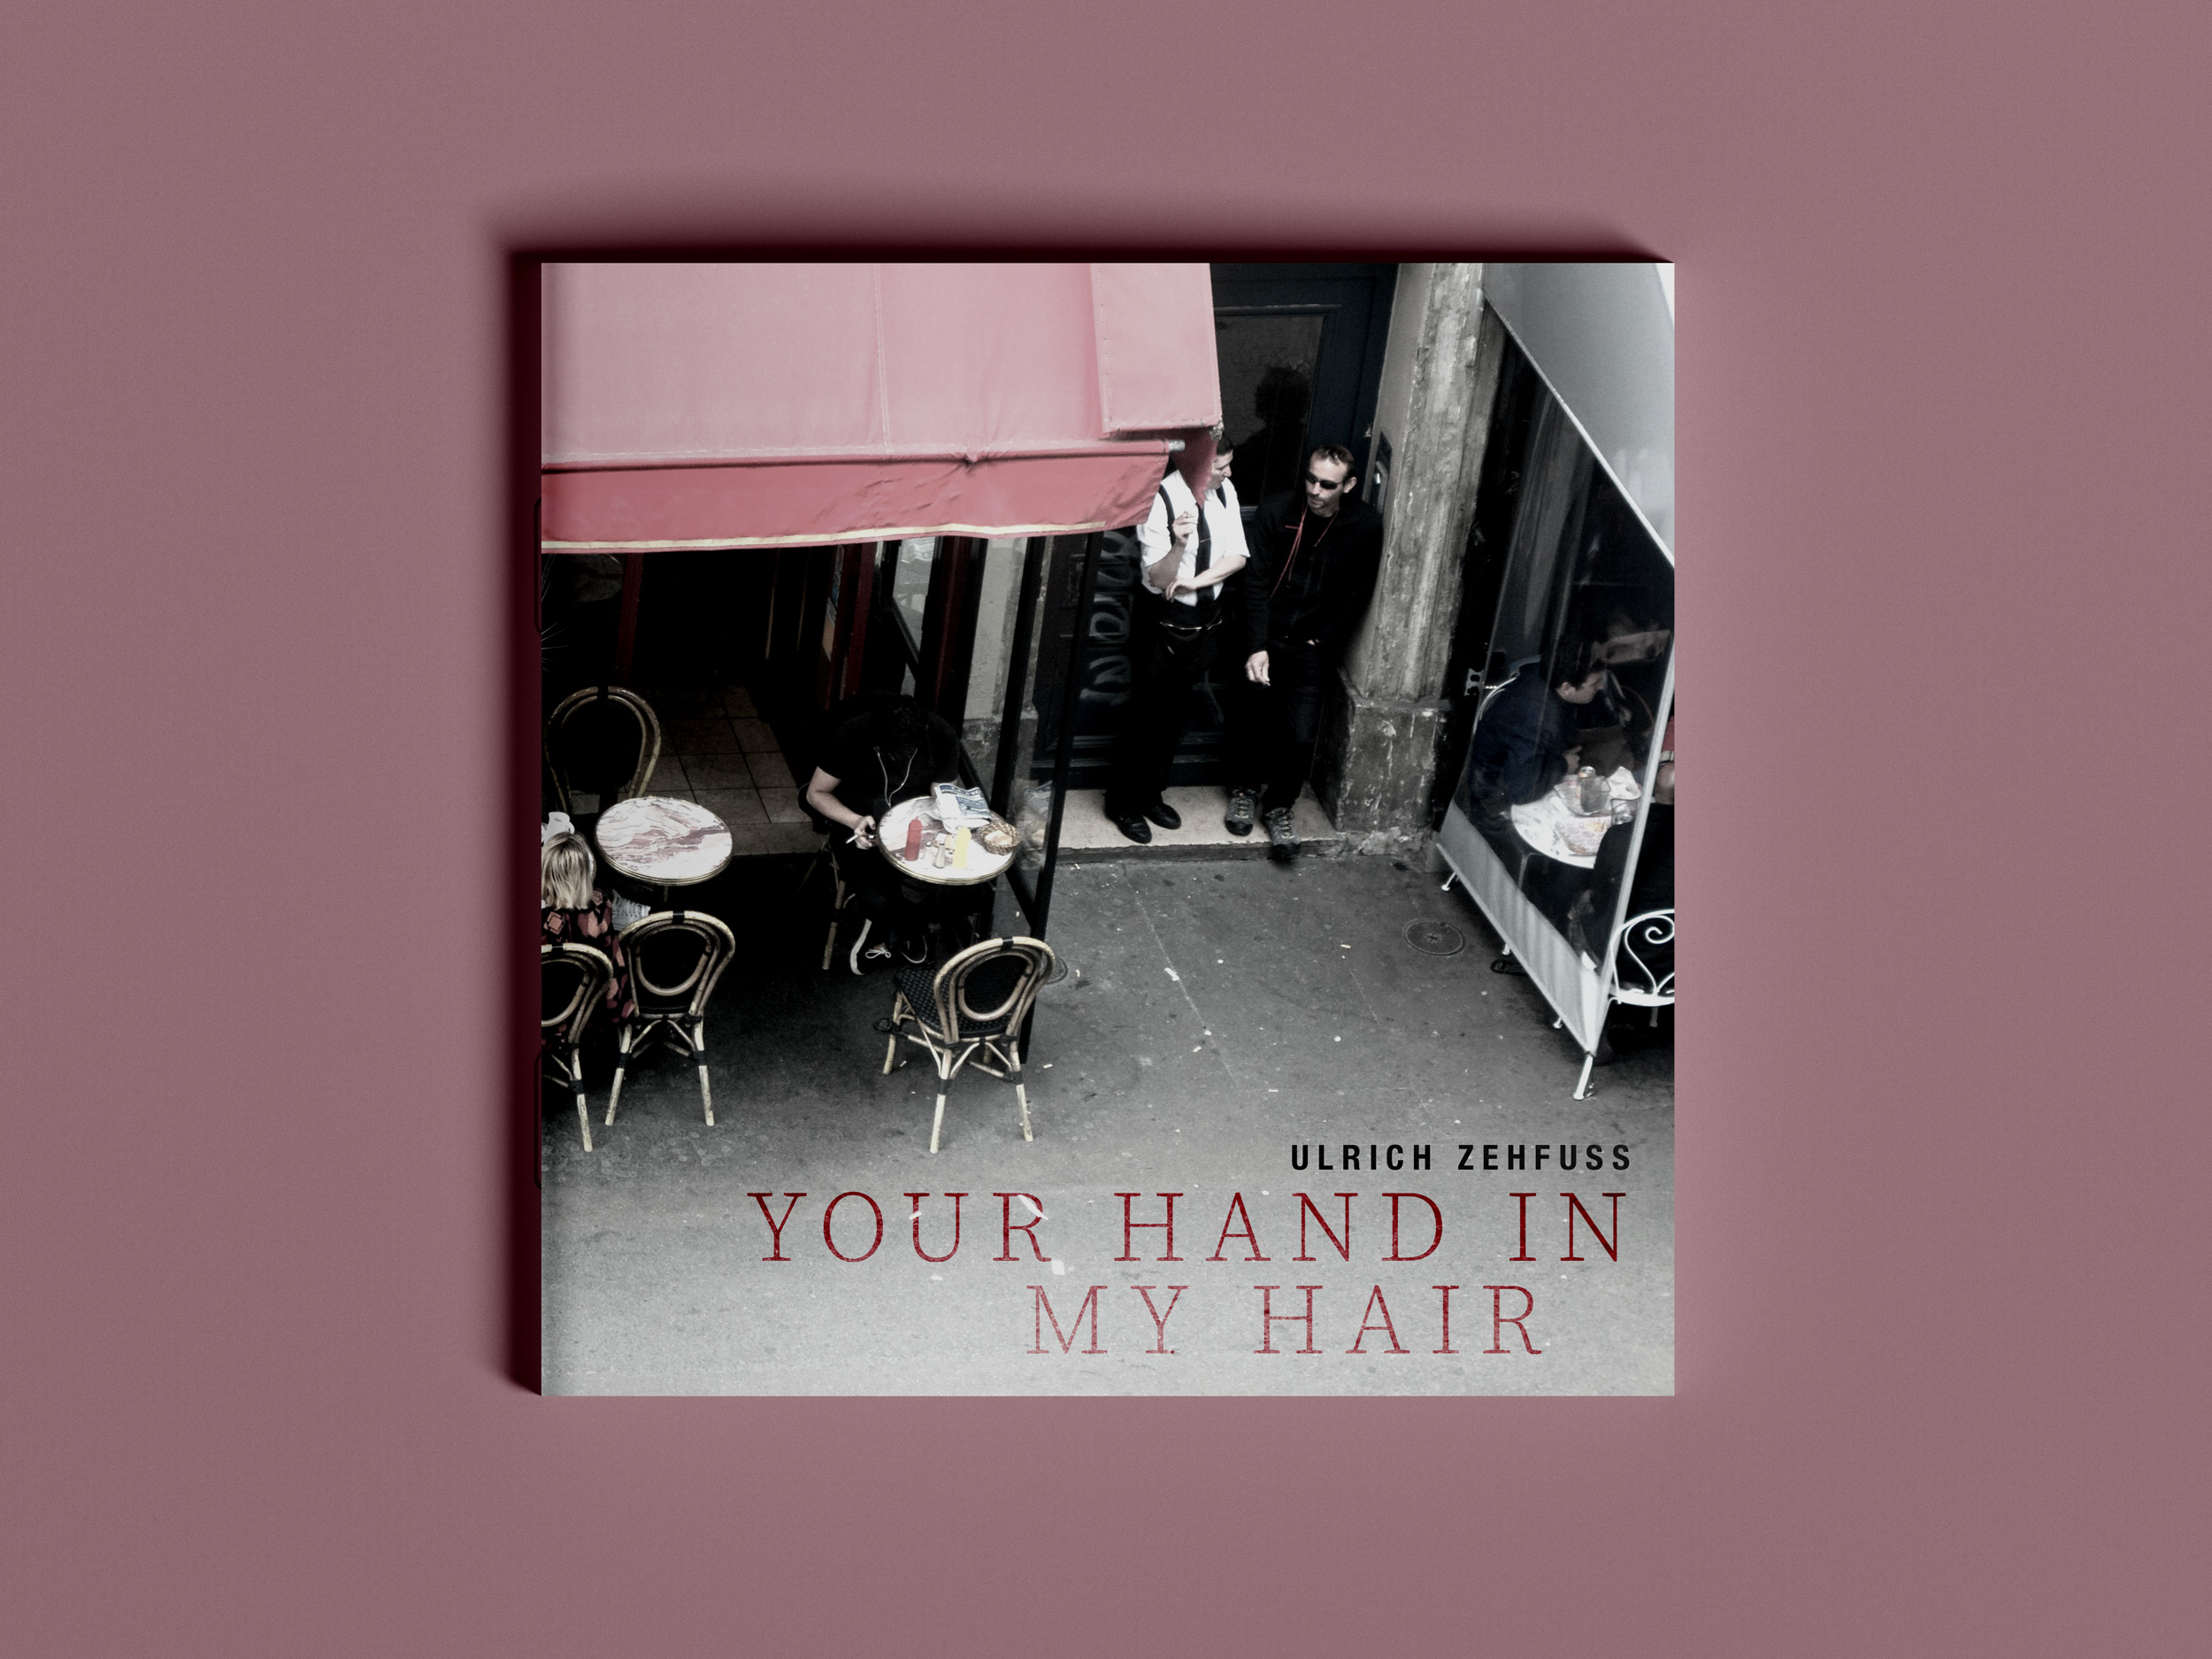 CD-Cover "Your Hand In My Hair", Ulrich Zehfuss